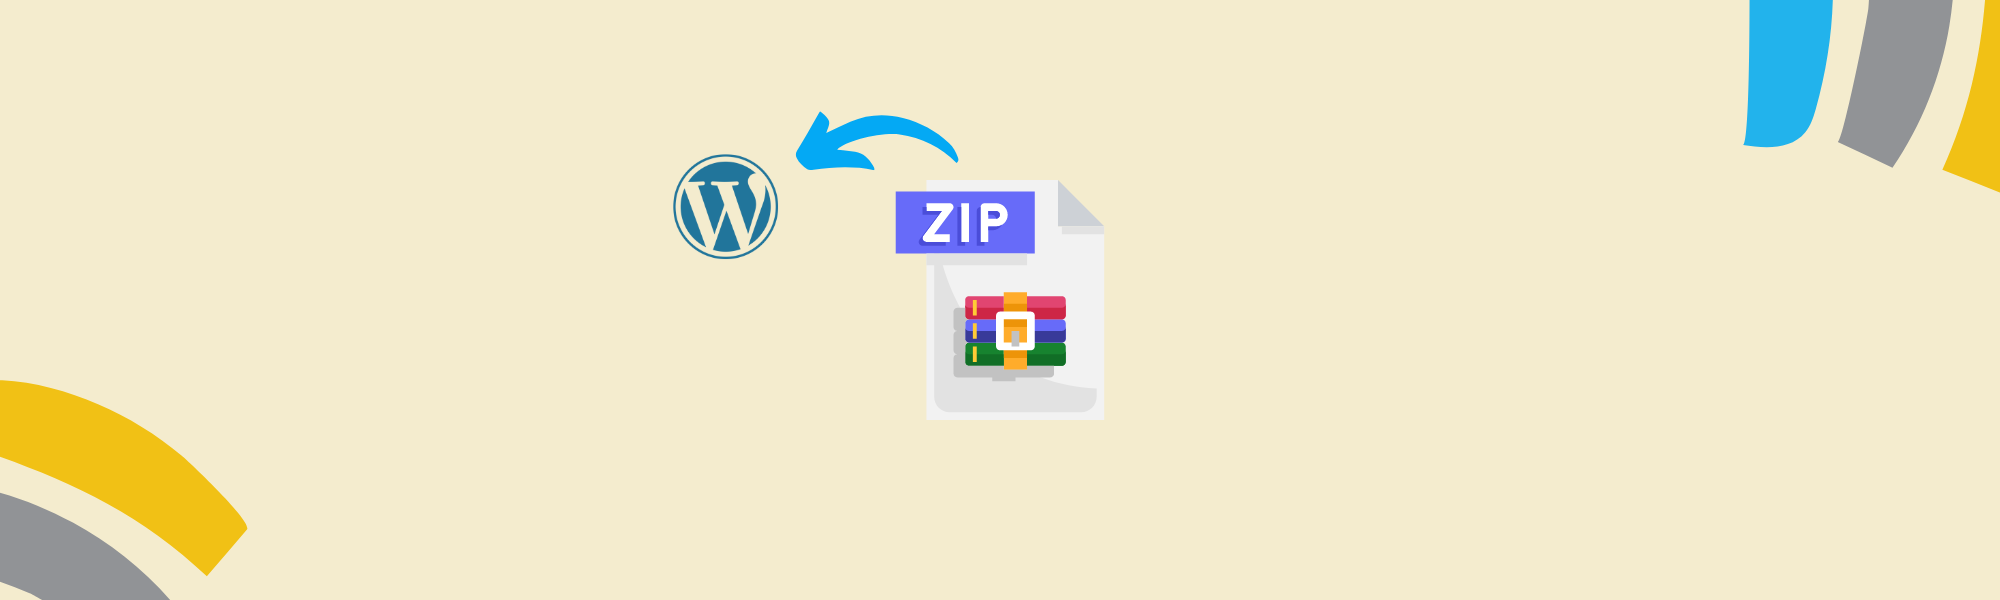 The Step-by-Step Guide to Installing WordPress via ZIP File